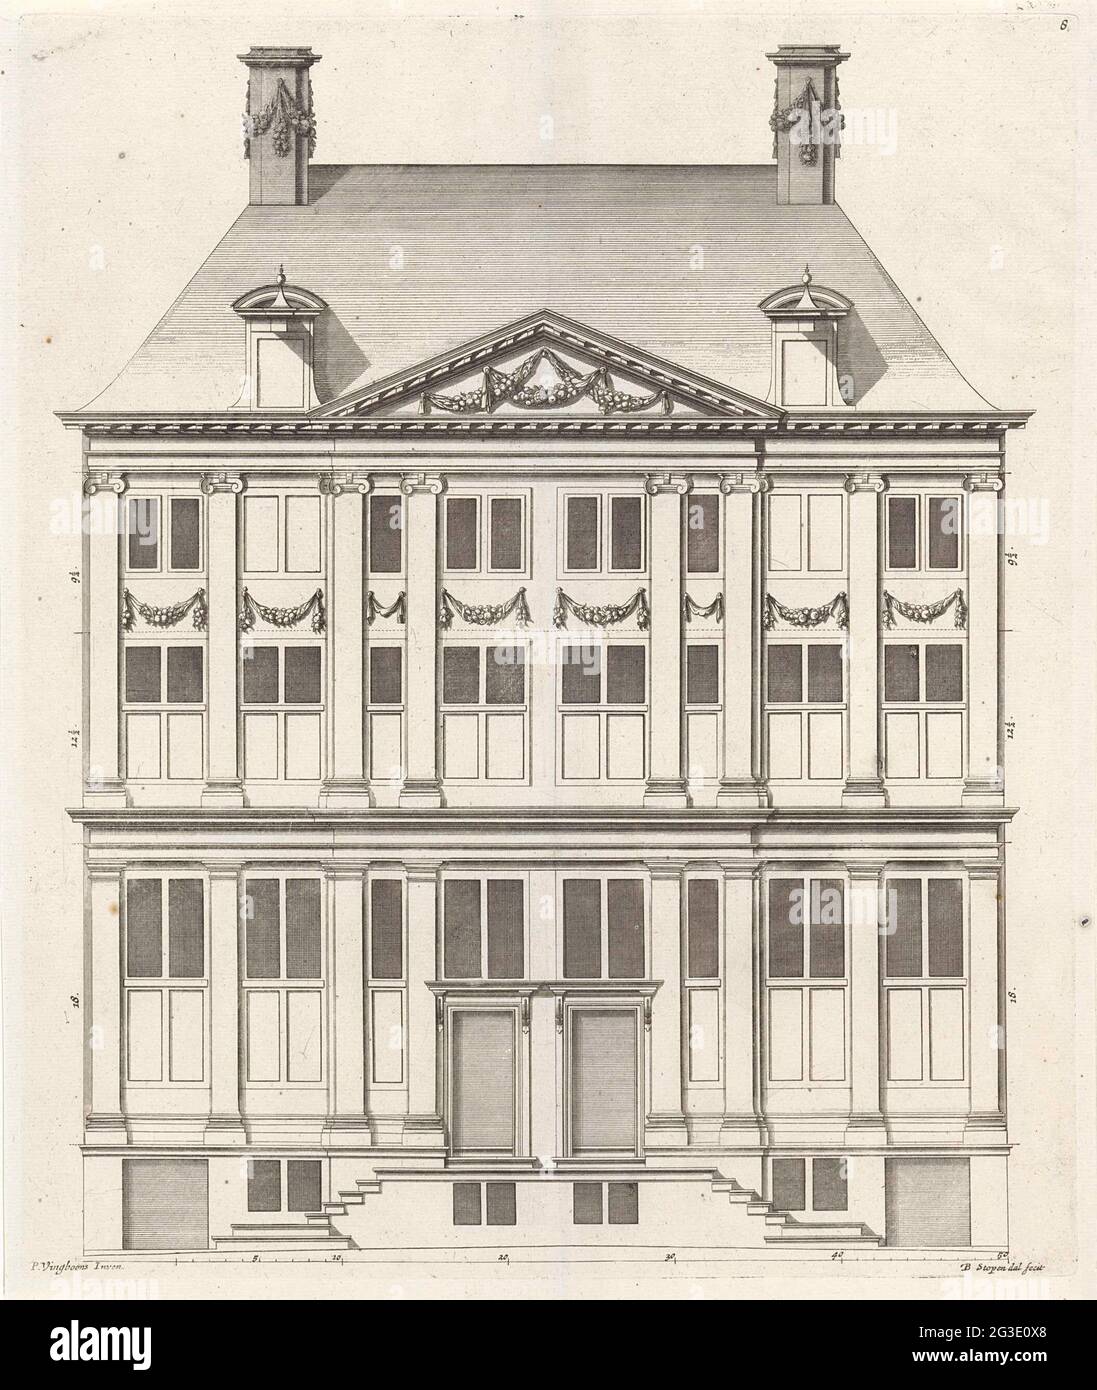 Facade of a Double House at the Oudezijds Voorburgwal in Amsterdam. Facade of the Double House at the Oudezijds Voorburgwal 205-207 in Amsterdam. The house was designed by Philips Vingboons for Jan and Hendrik Schuyt in 1650. Stock Photo